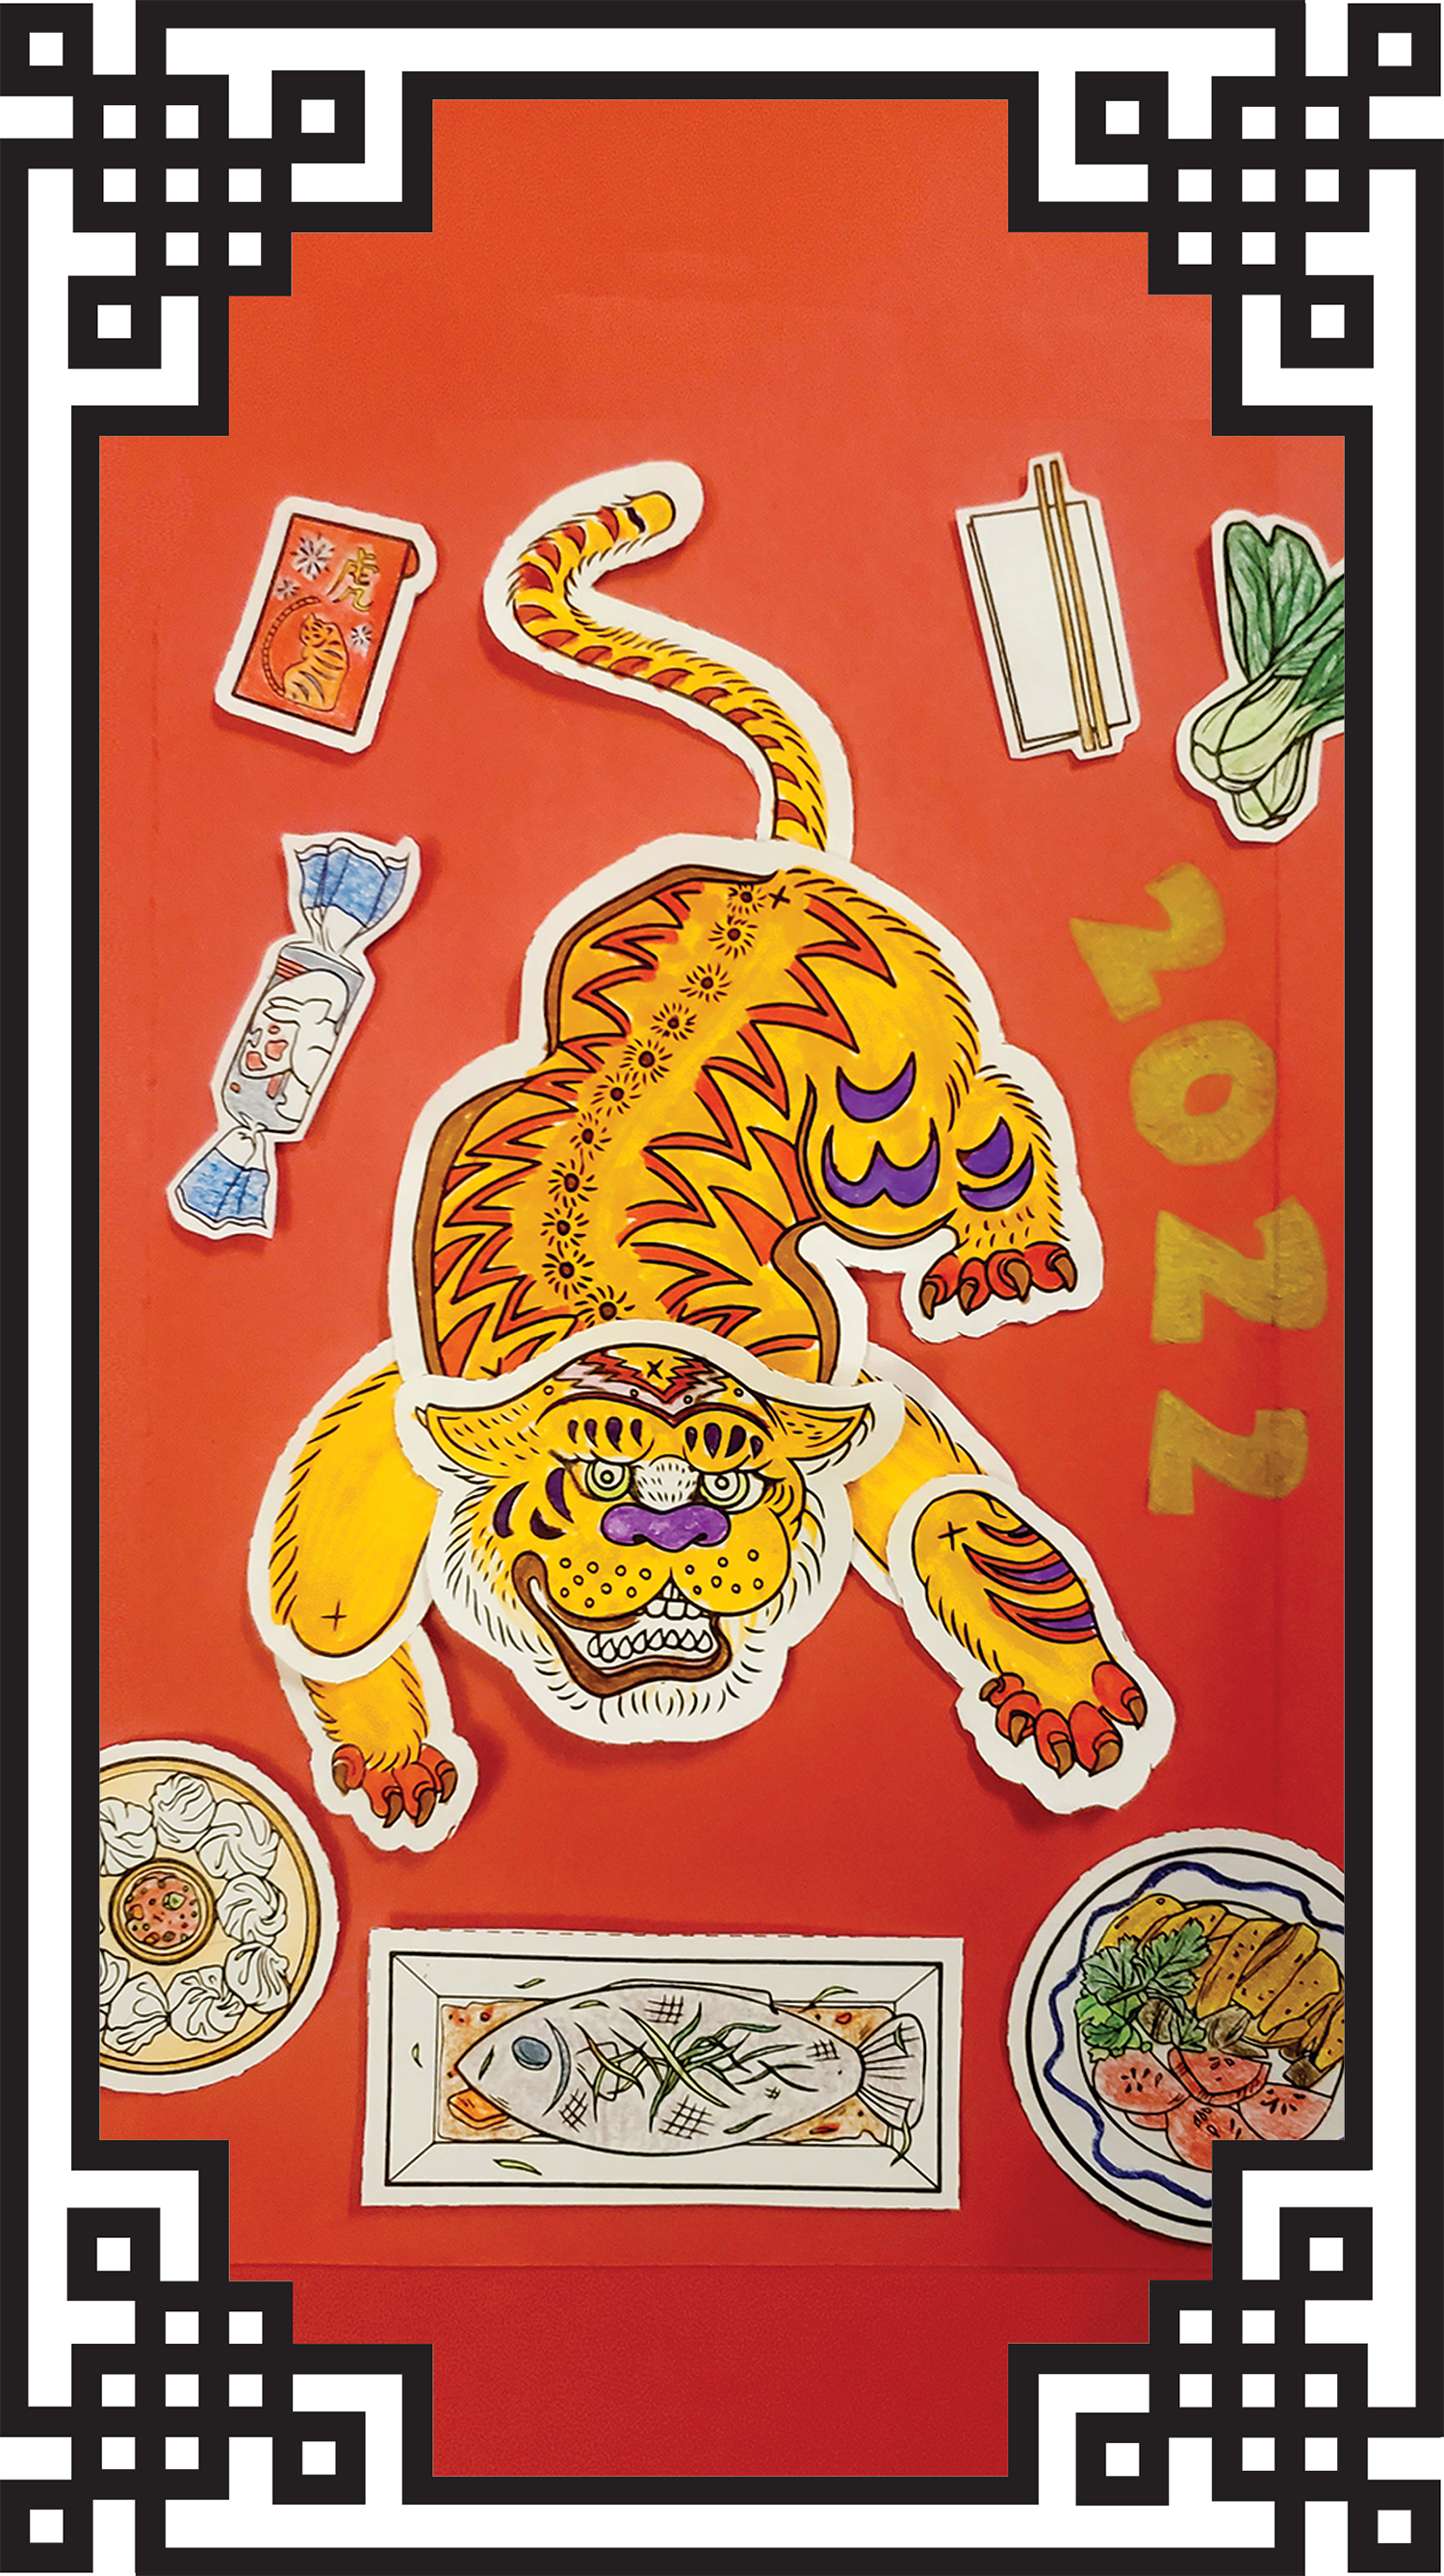 Vertical Yue Moon artwork of a folk art Tiger with Lunar New Year foods around it, it is on a red background with a traditional Chinese black & white border around it.